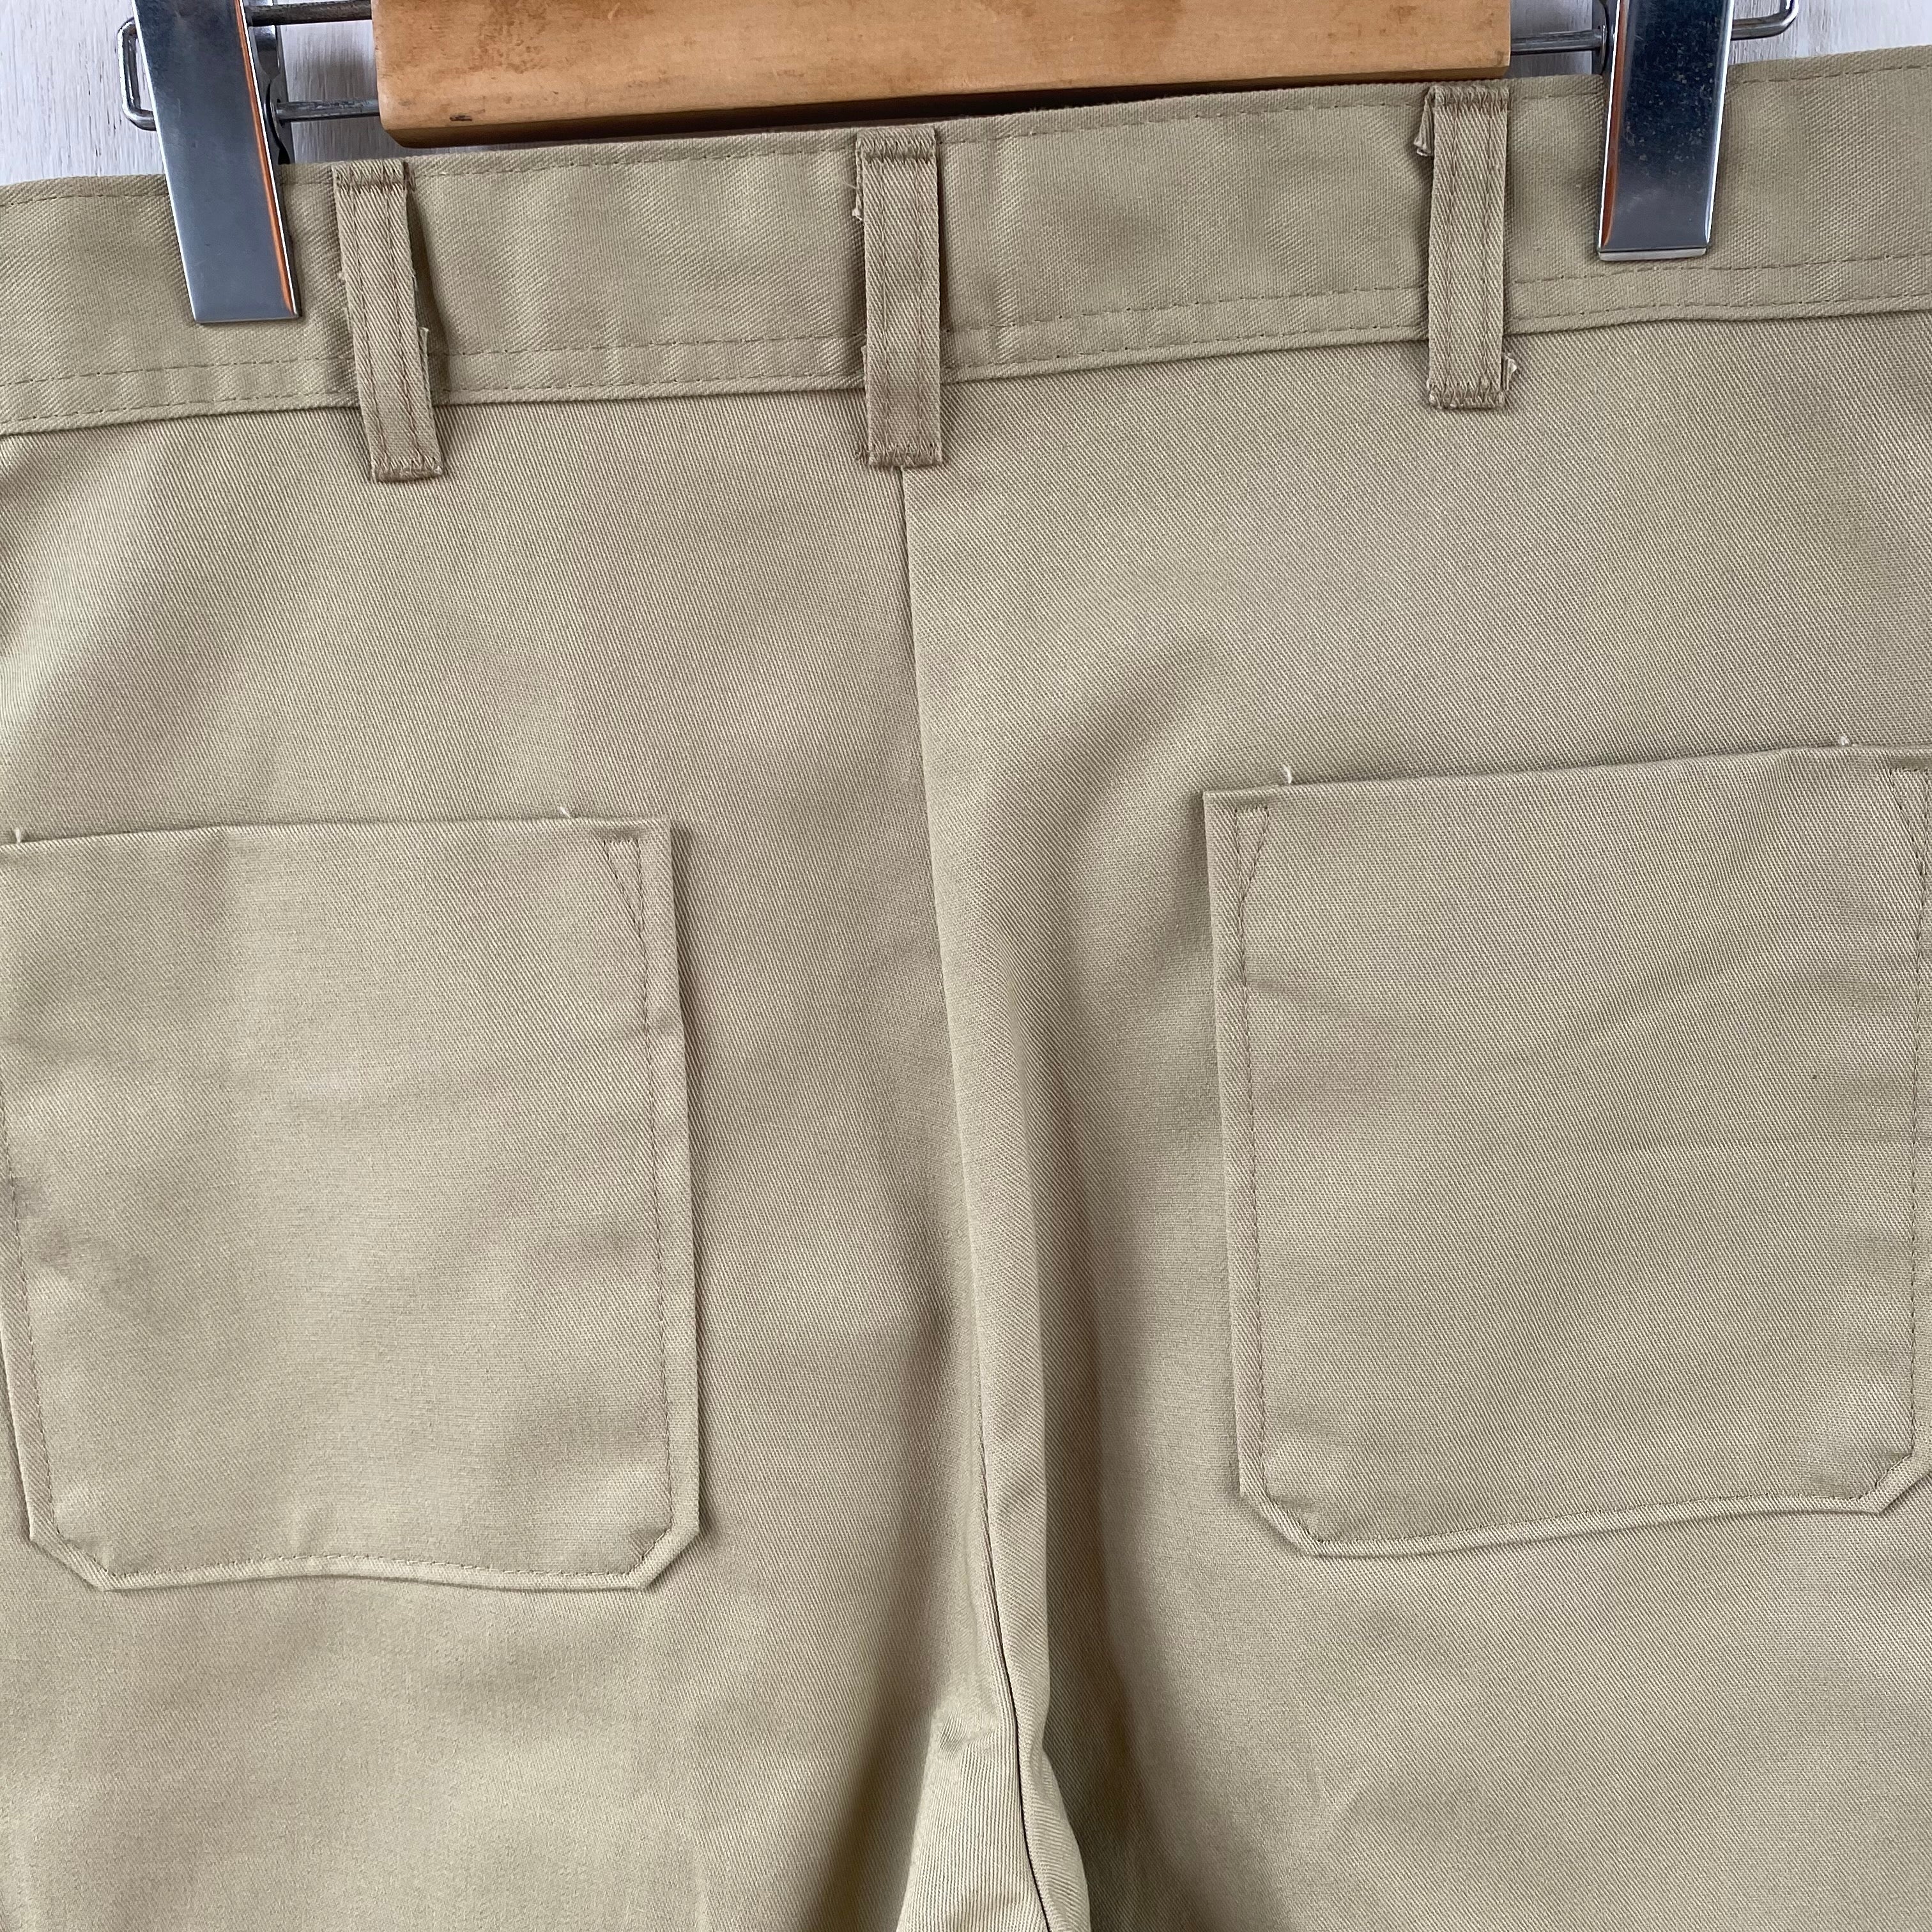 [ ONLY ONE ! ] U.S.PRISONER'S TROUSERS / Mr.Clean Select